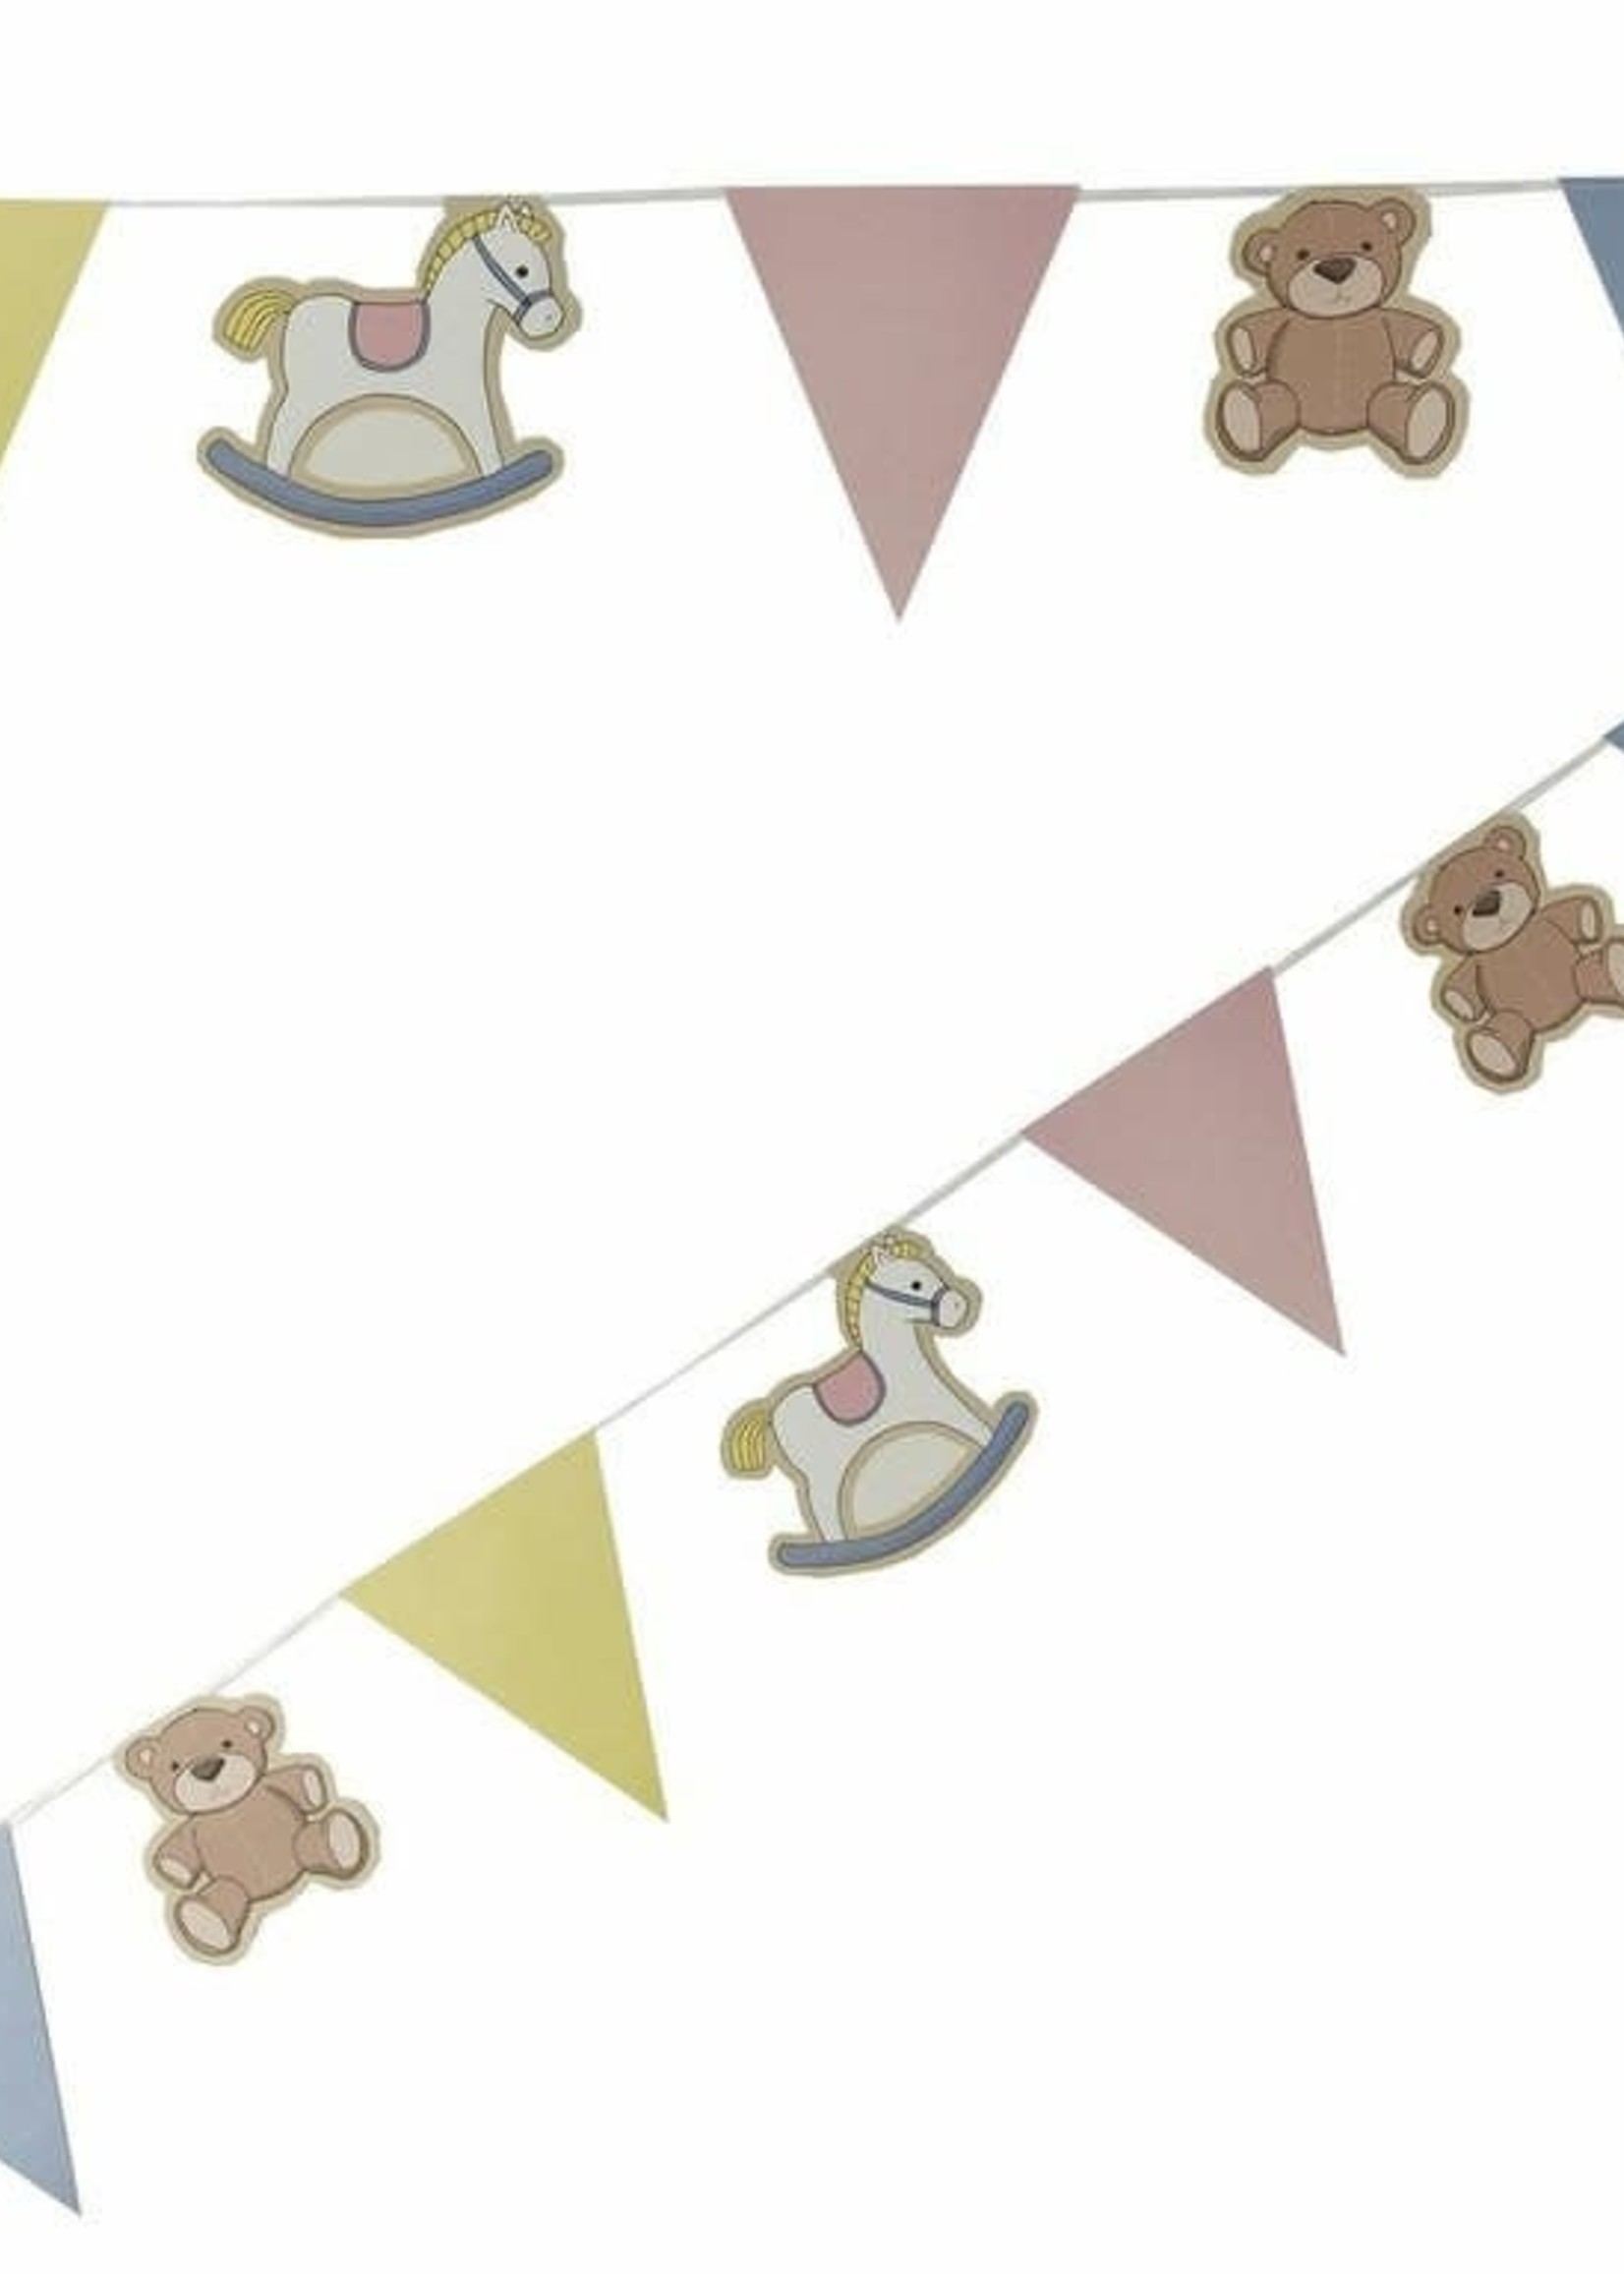 Rock-a-bye baby paper bunting 3.5m